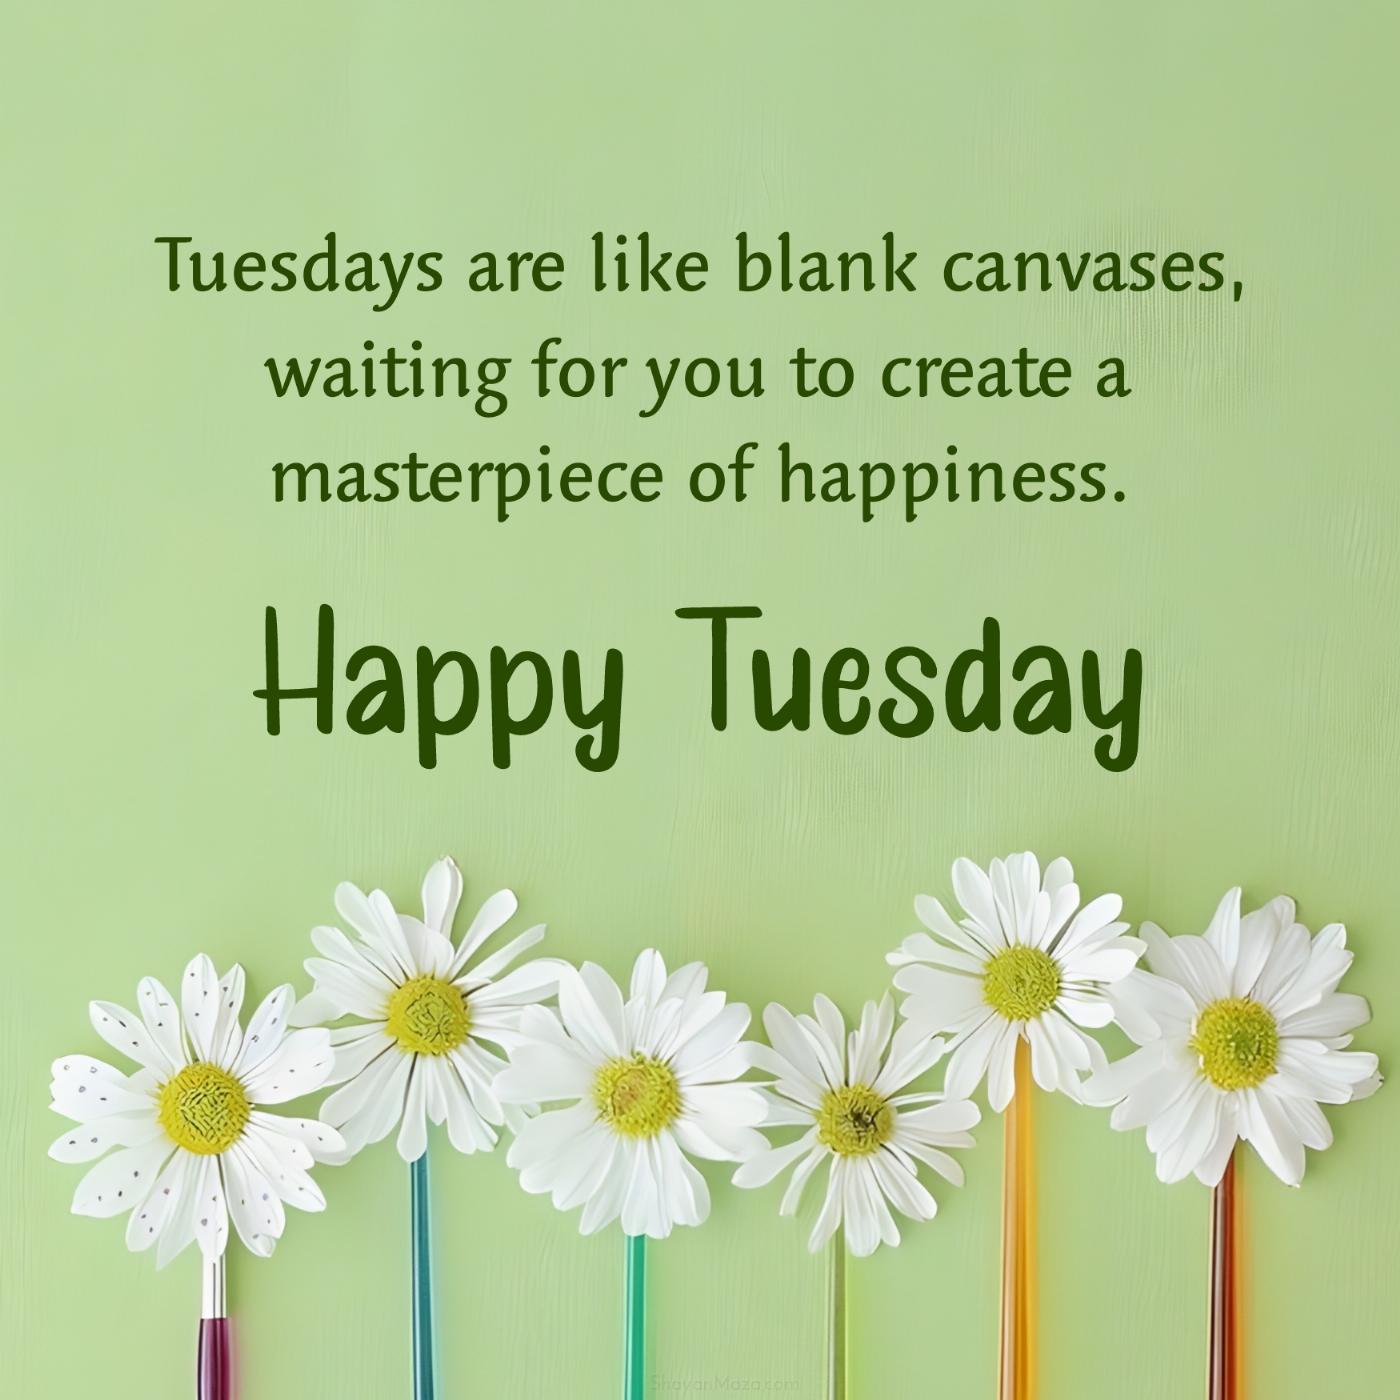 Tuesdays are like blank canvases waiting for you to create